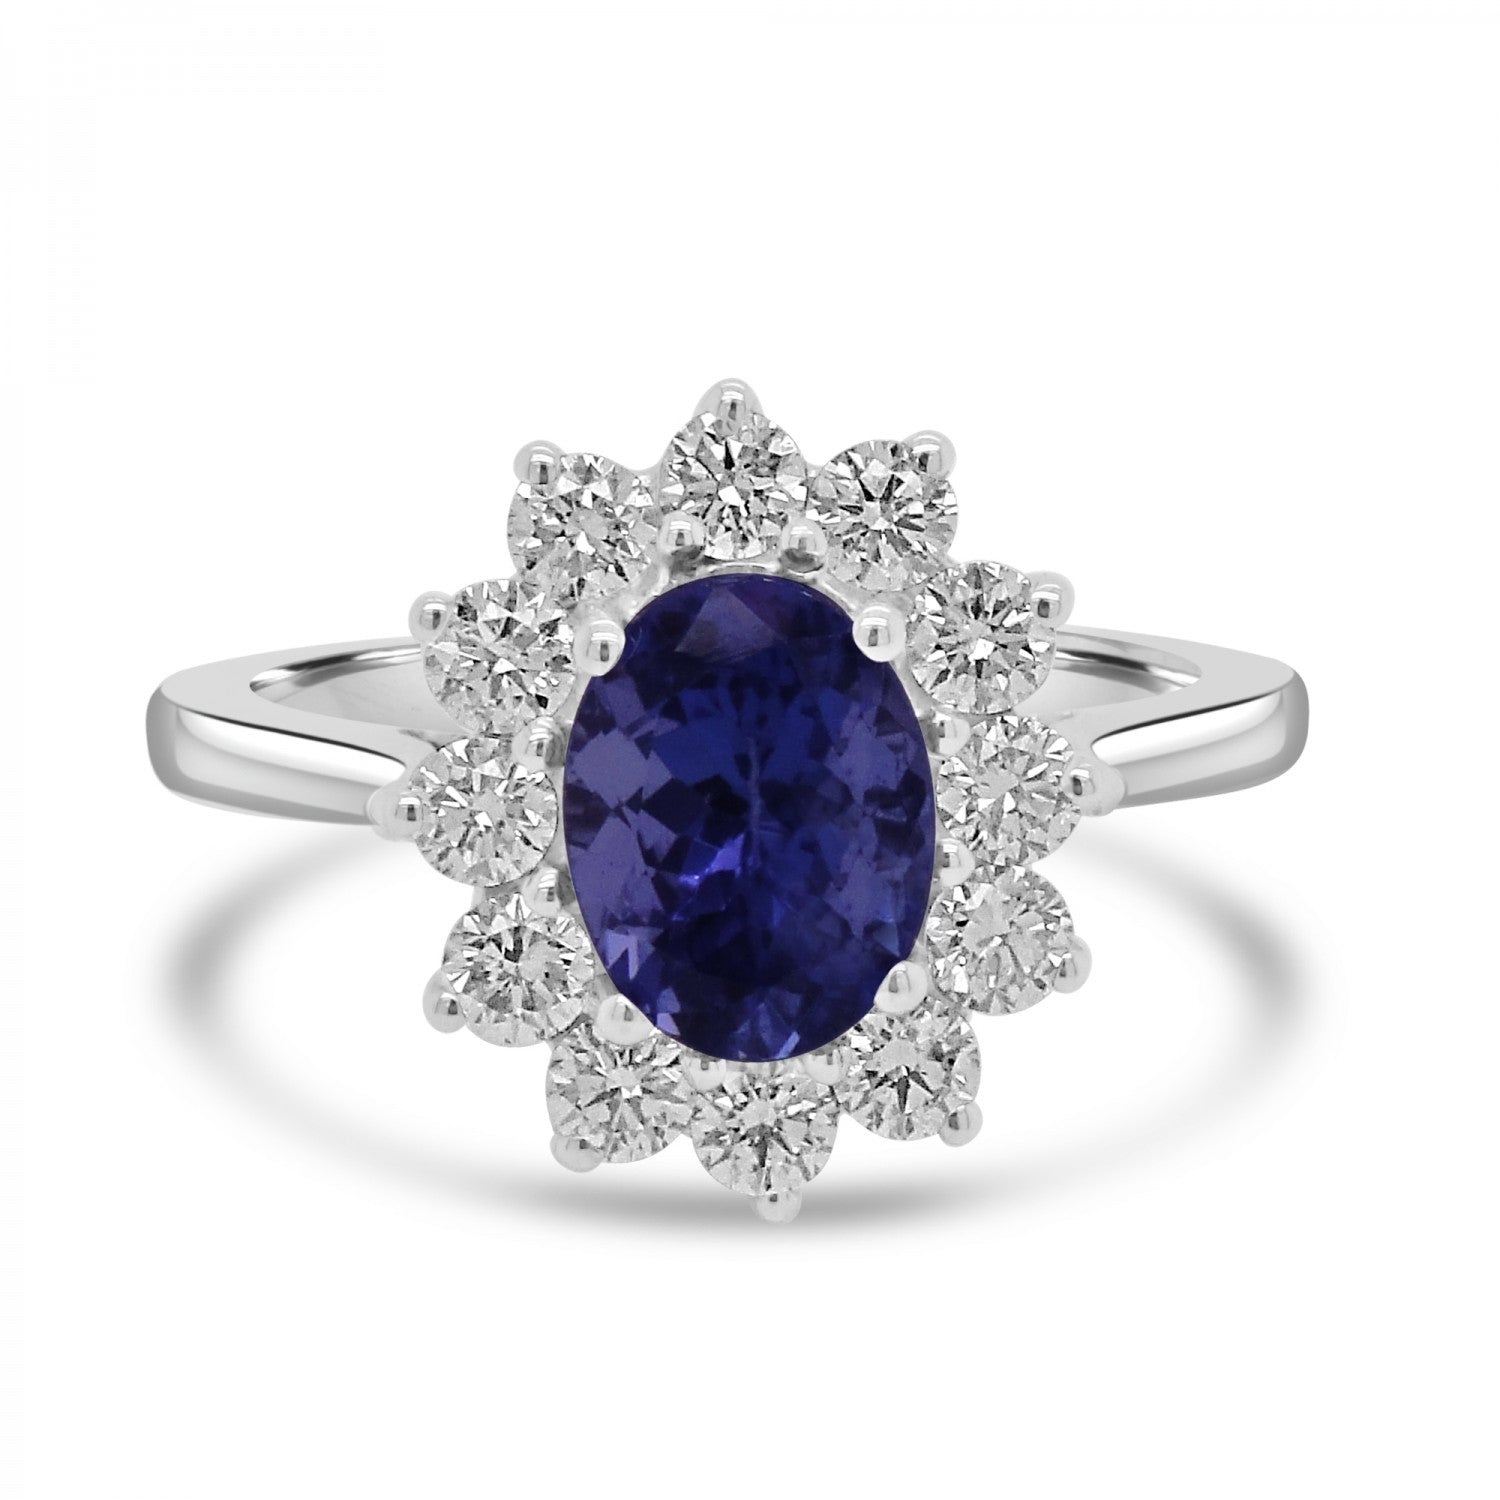 OVAL CUT TANZANITE CLUSTER ENGAGEMENT RINGS